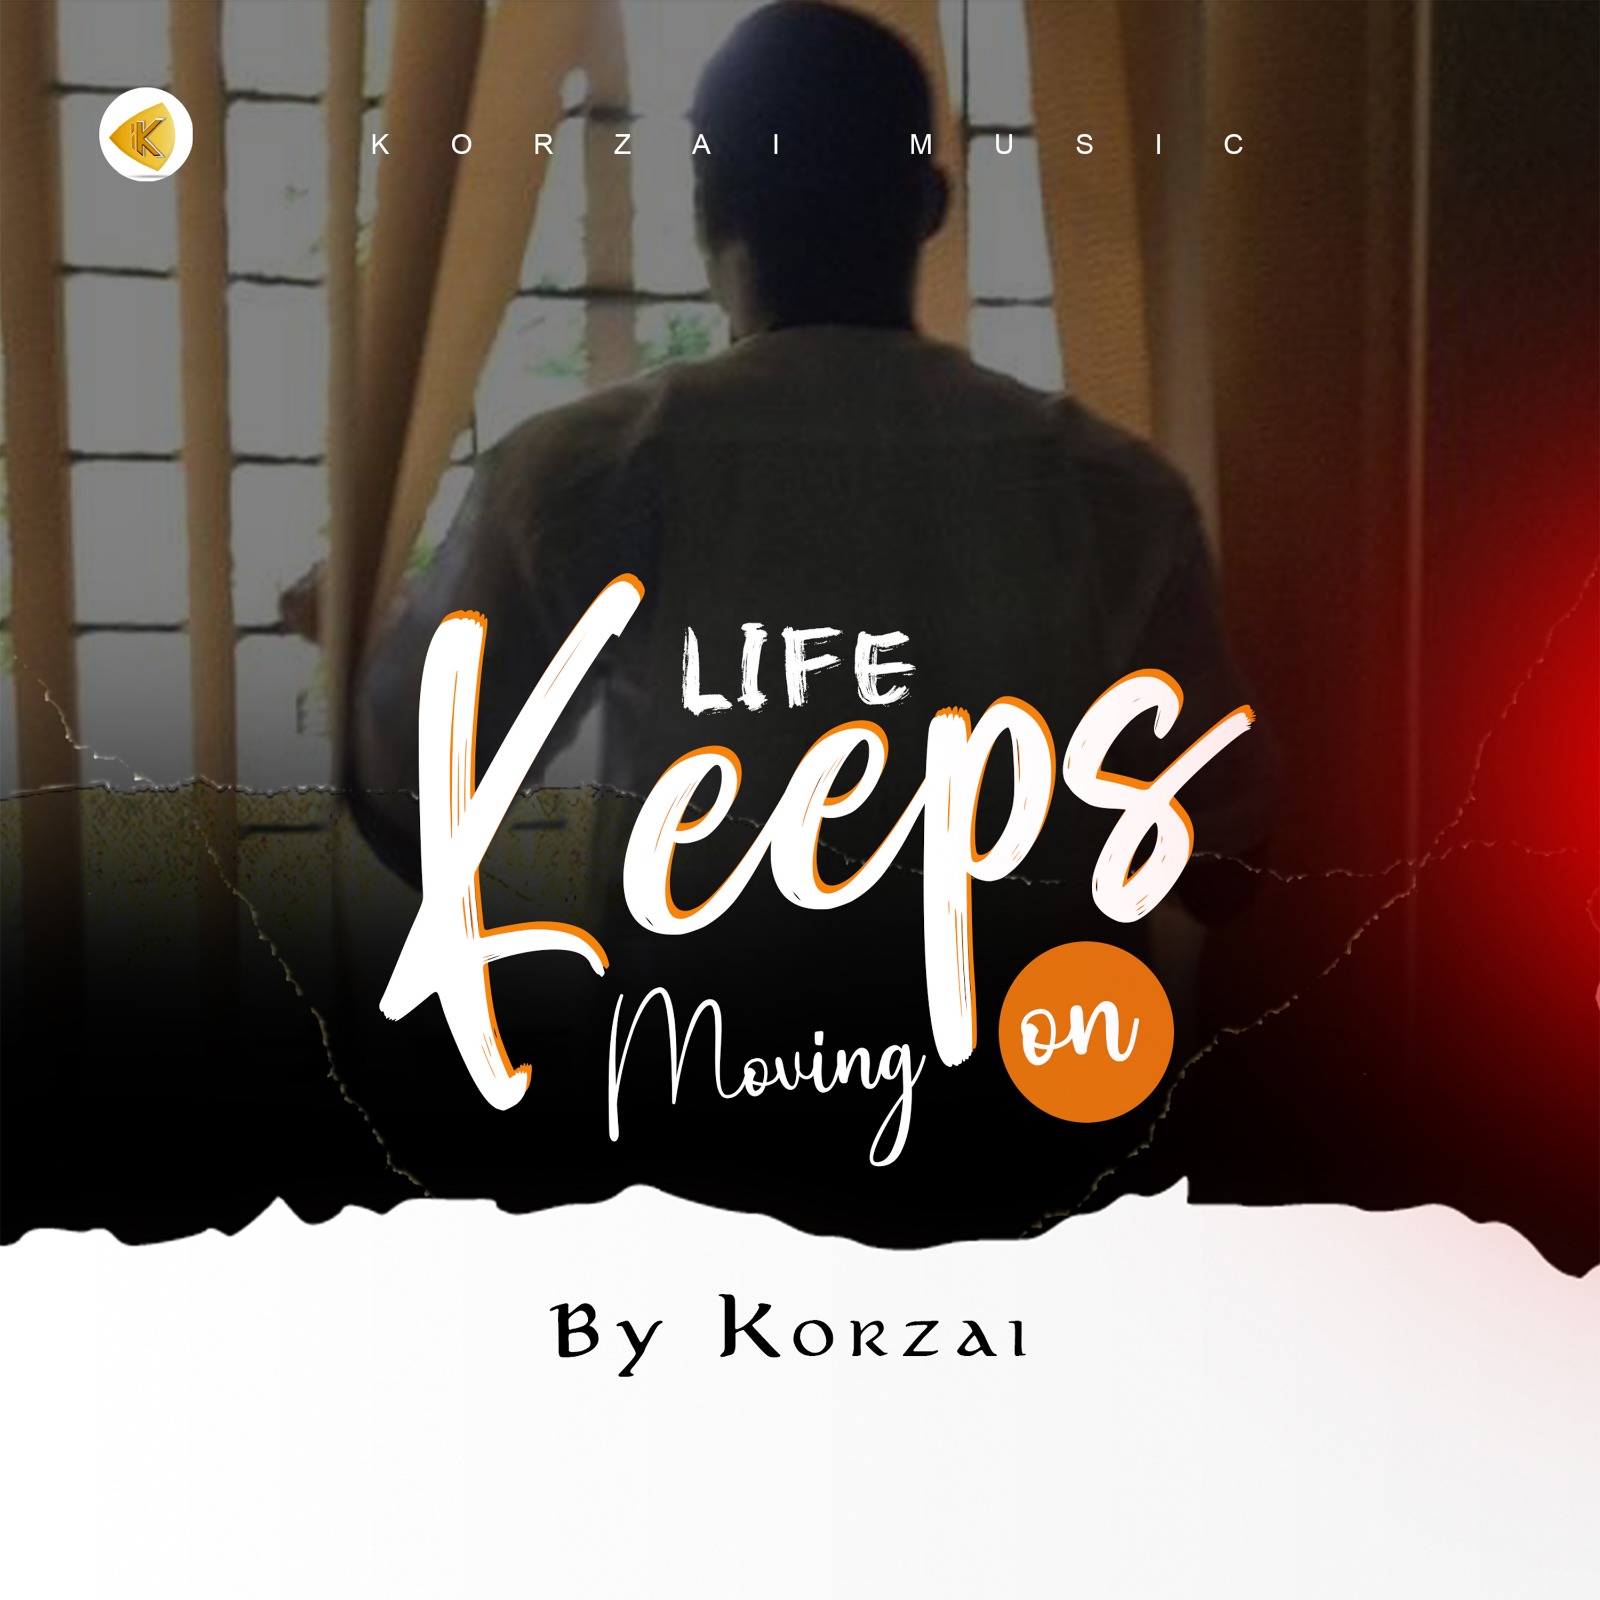 Korzai Captures Life’s Journey in New Single “Life Keeps Moving On”